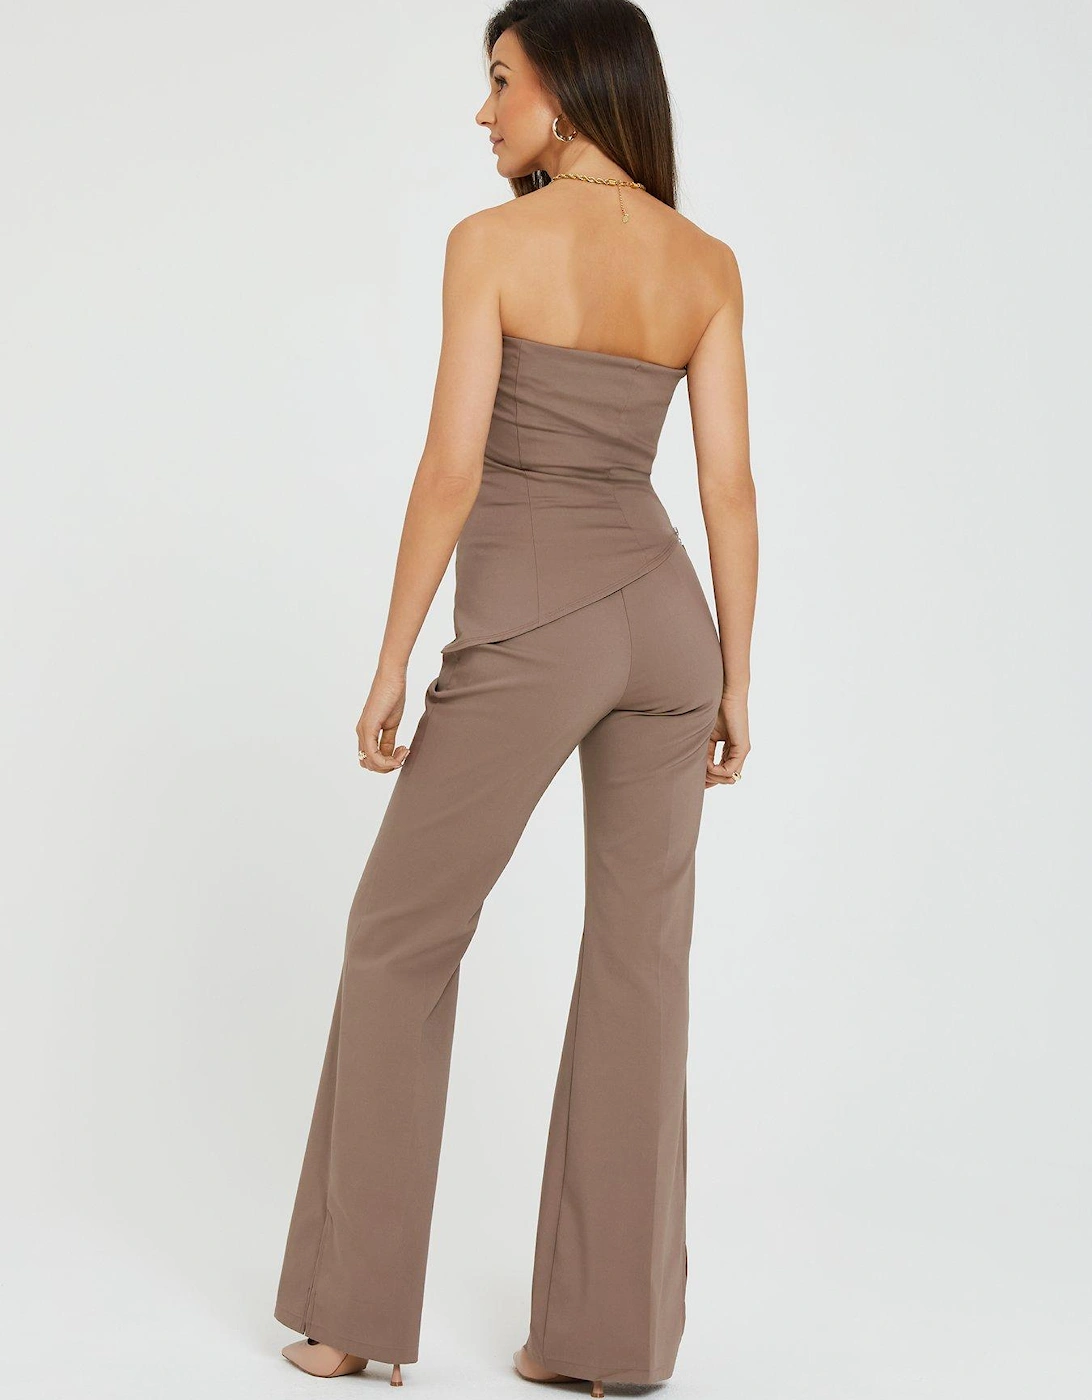 Bandeau Gathered Co-Ord Top - Camel 